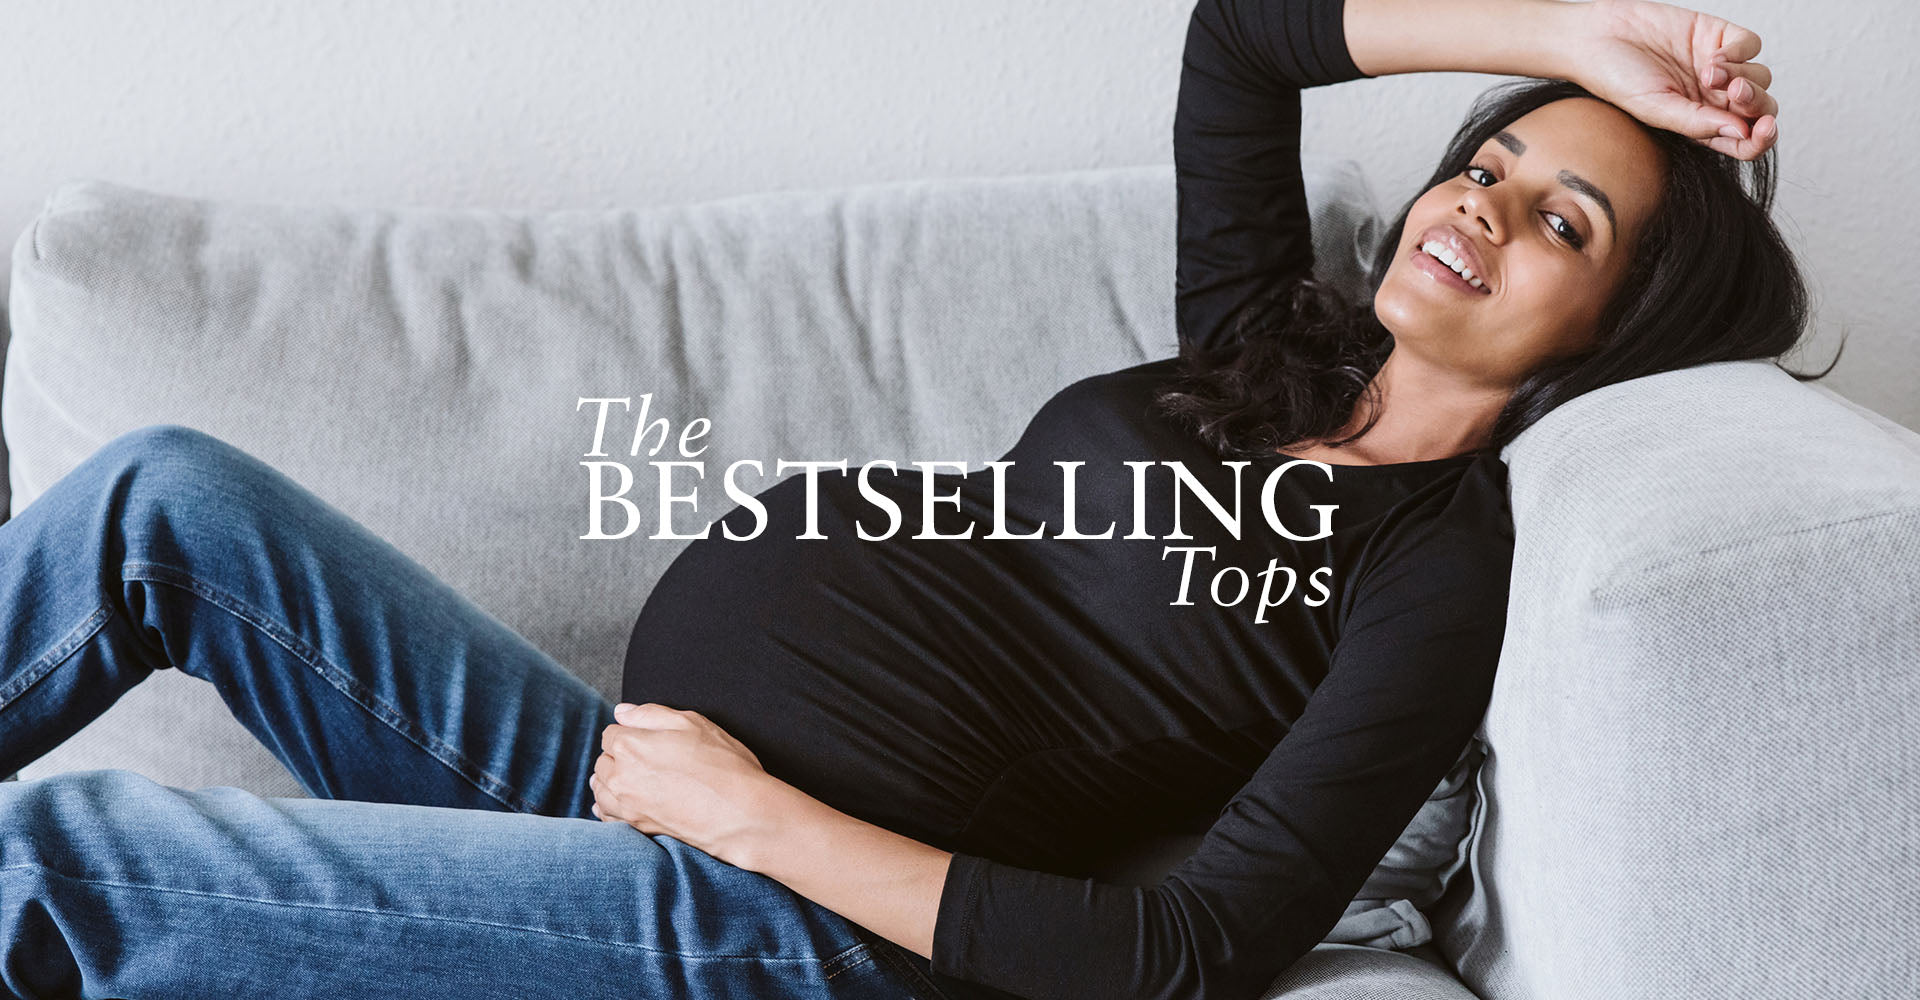 The Bestselling Tops